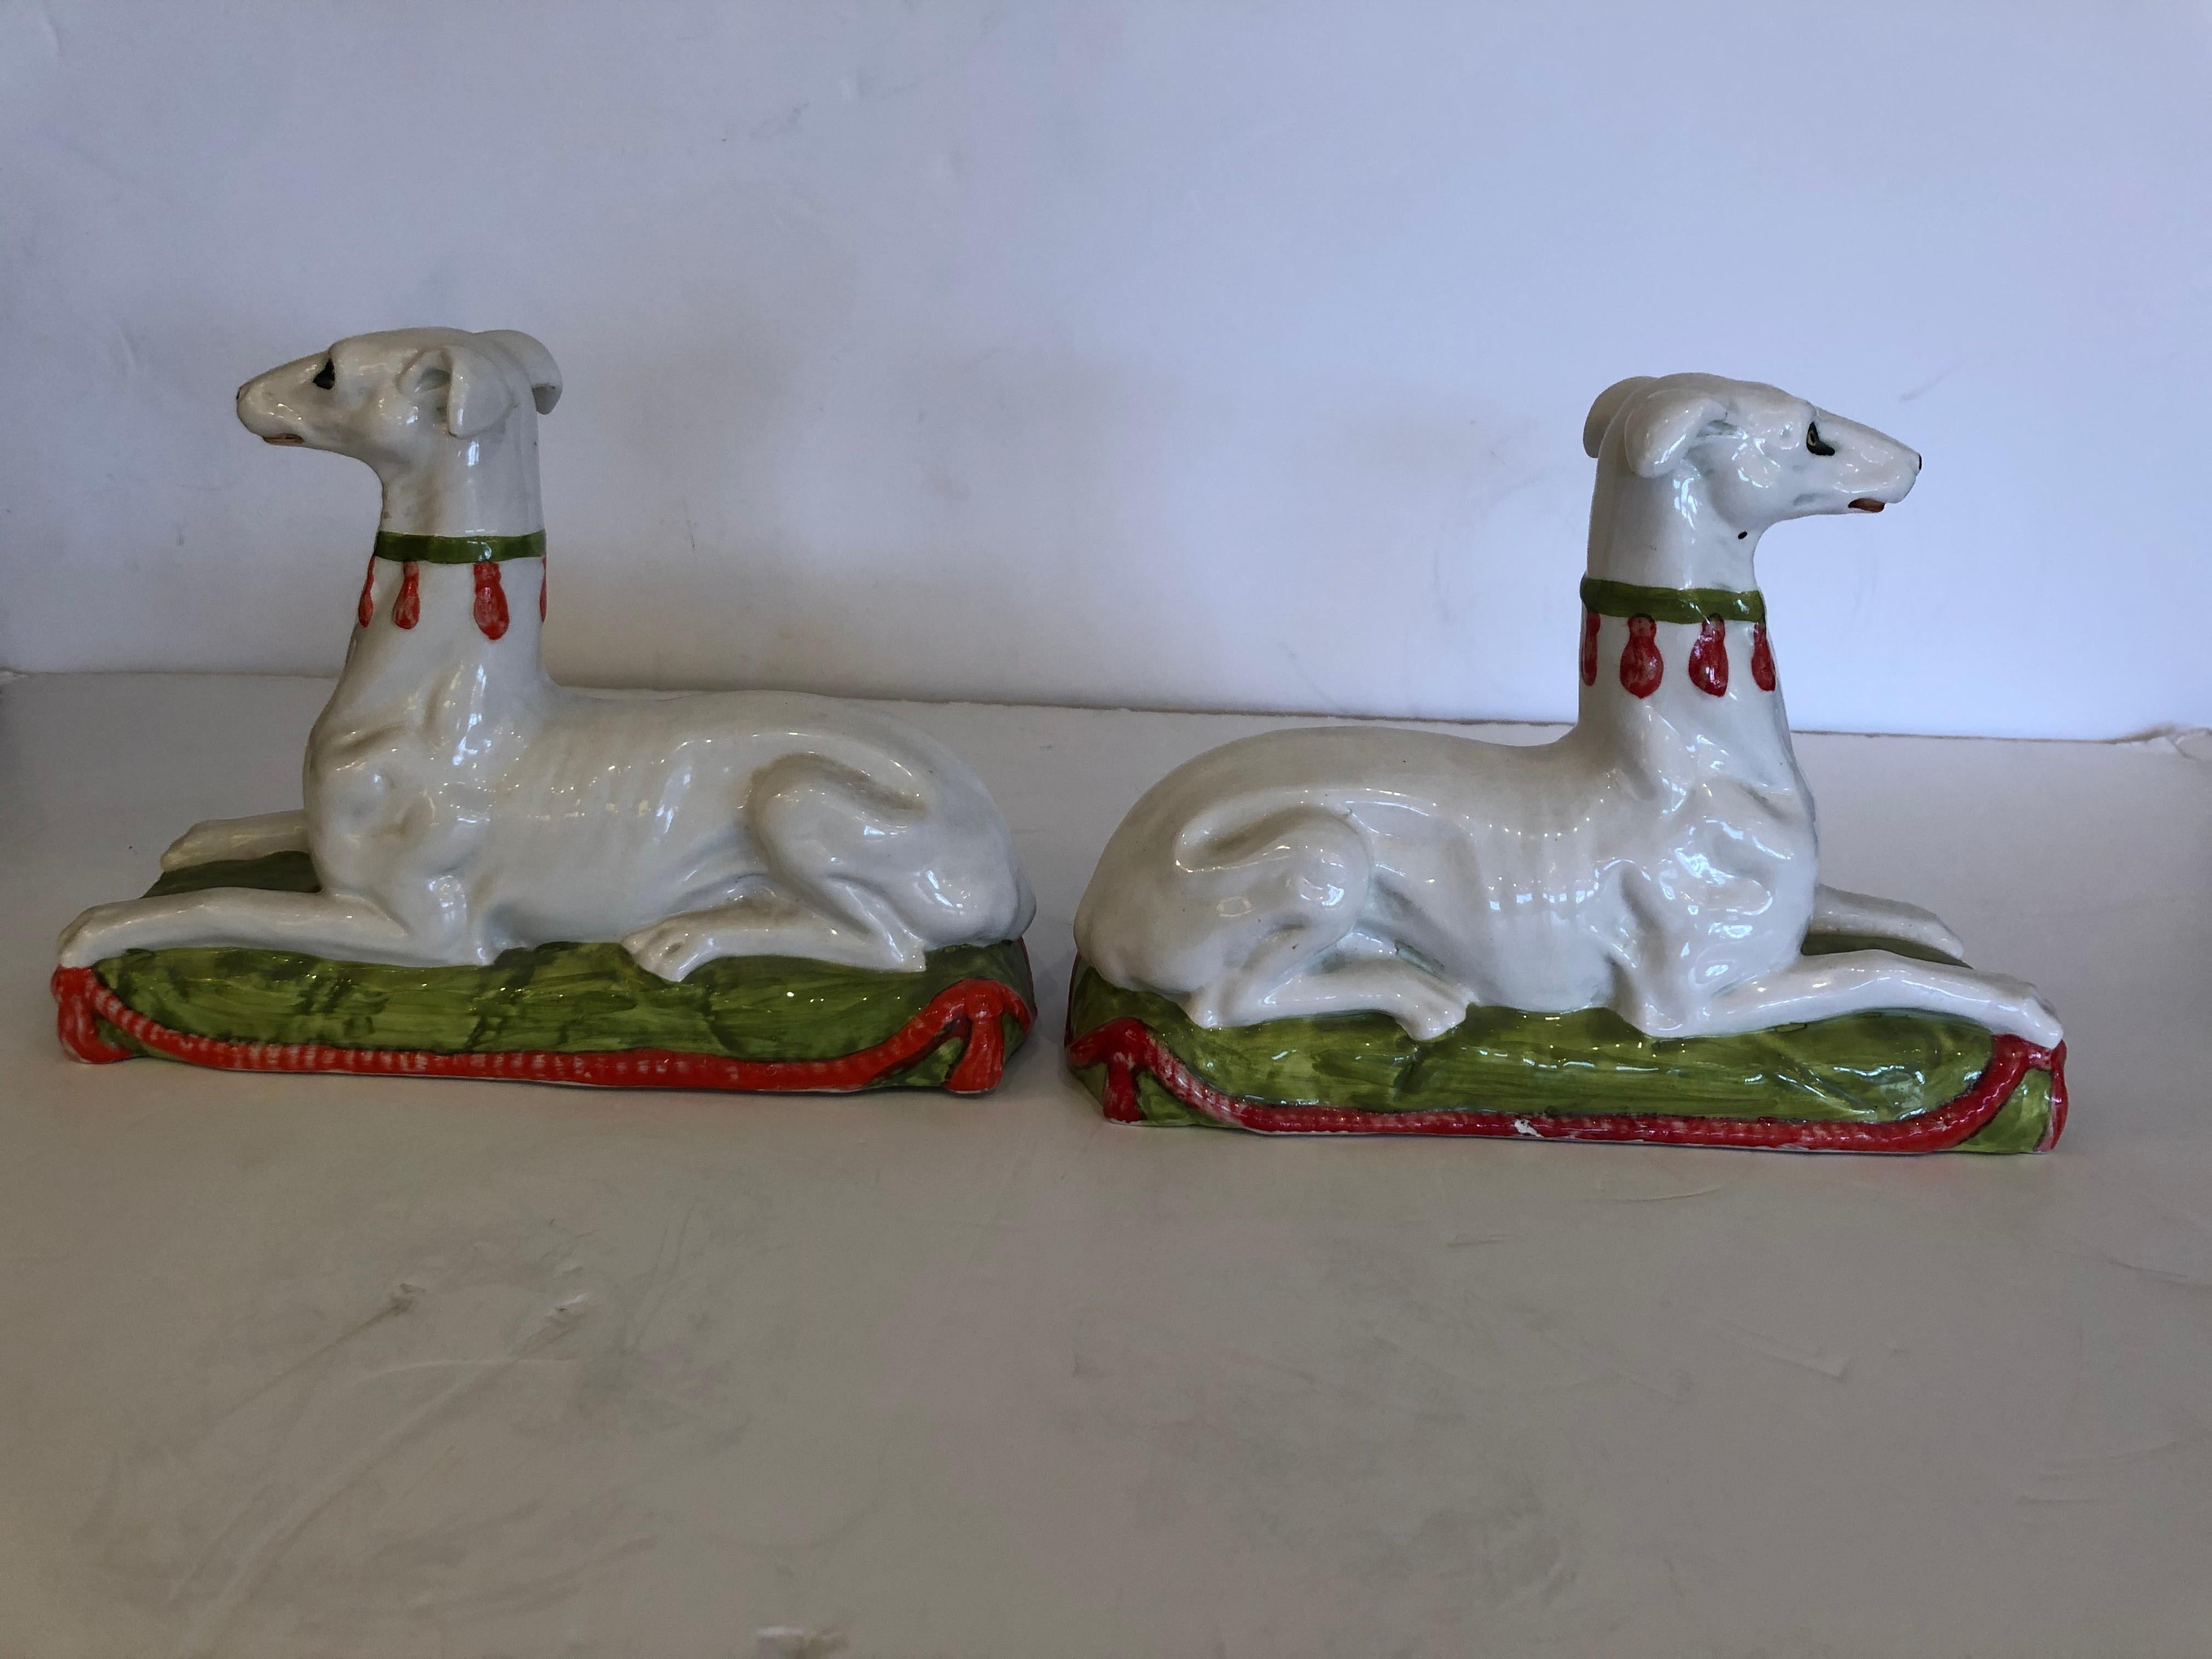 Striking Unusual Pair of Italian Ceramic Recument Whippets Greyhounds Sculptures For Sale 2